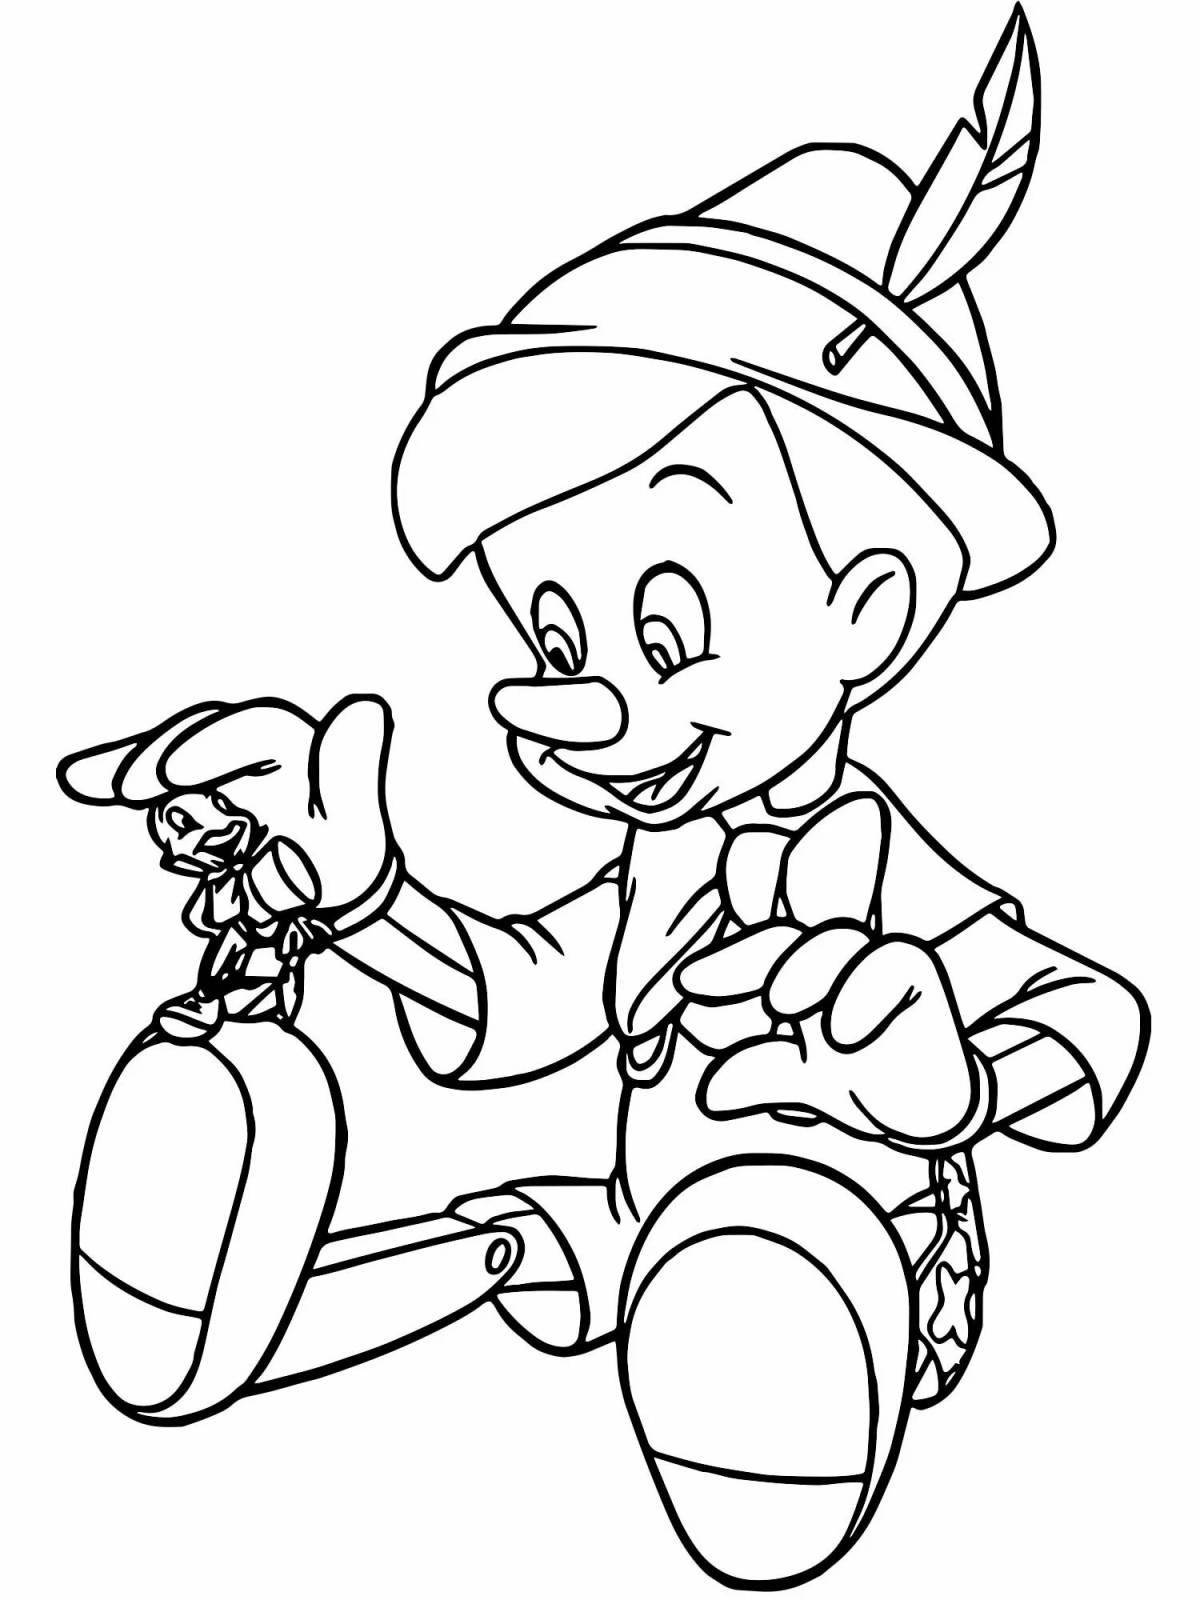 Pinocchio coloring book in bright colors for kids